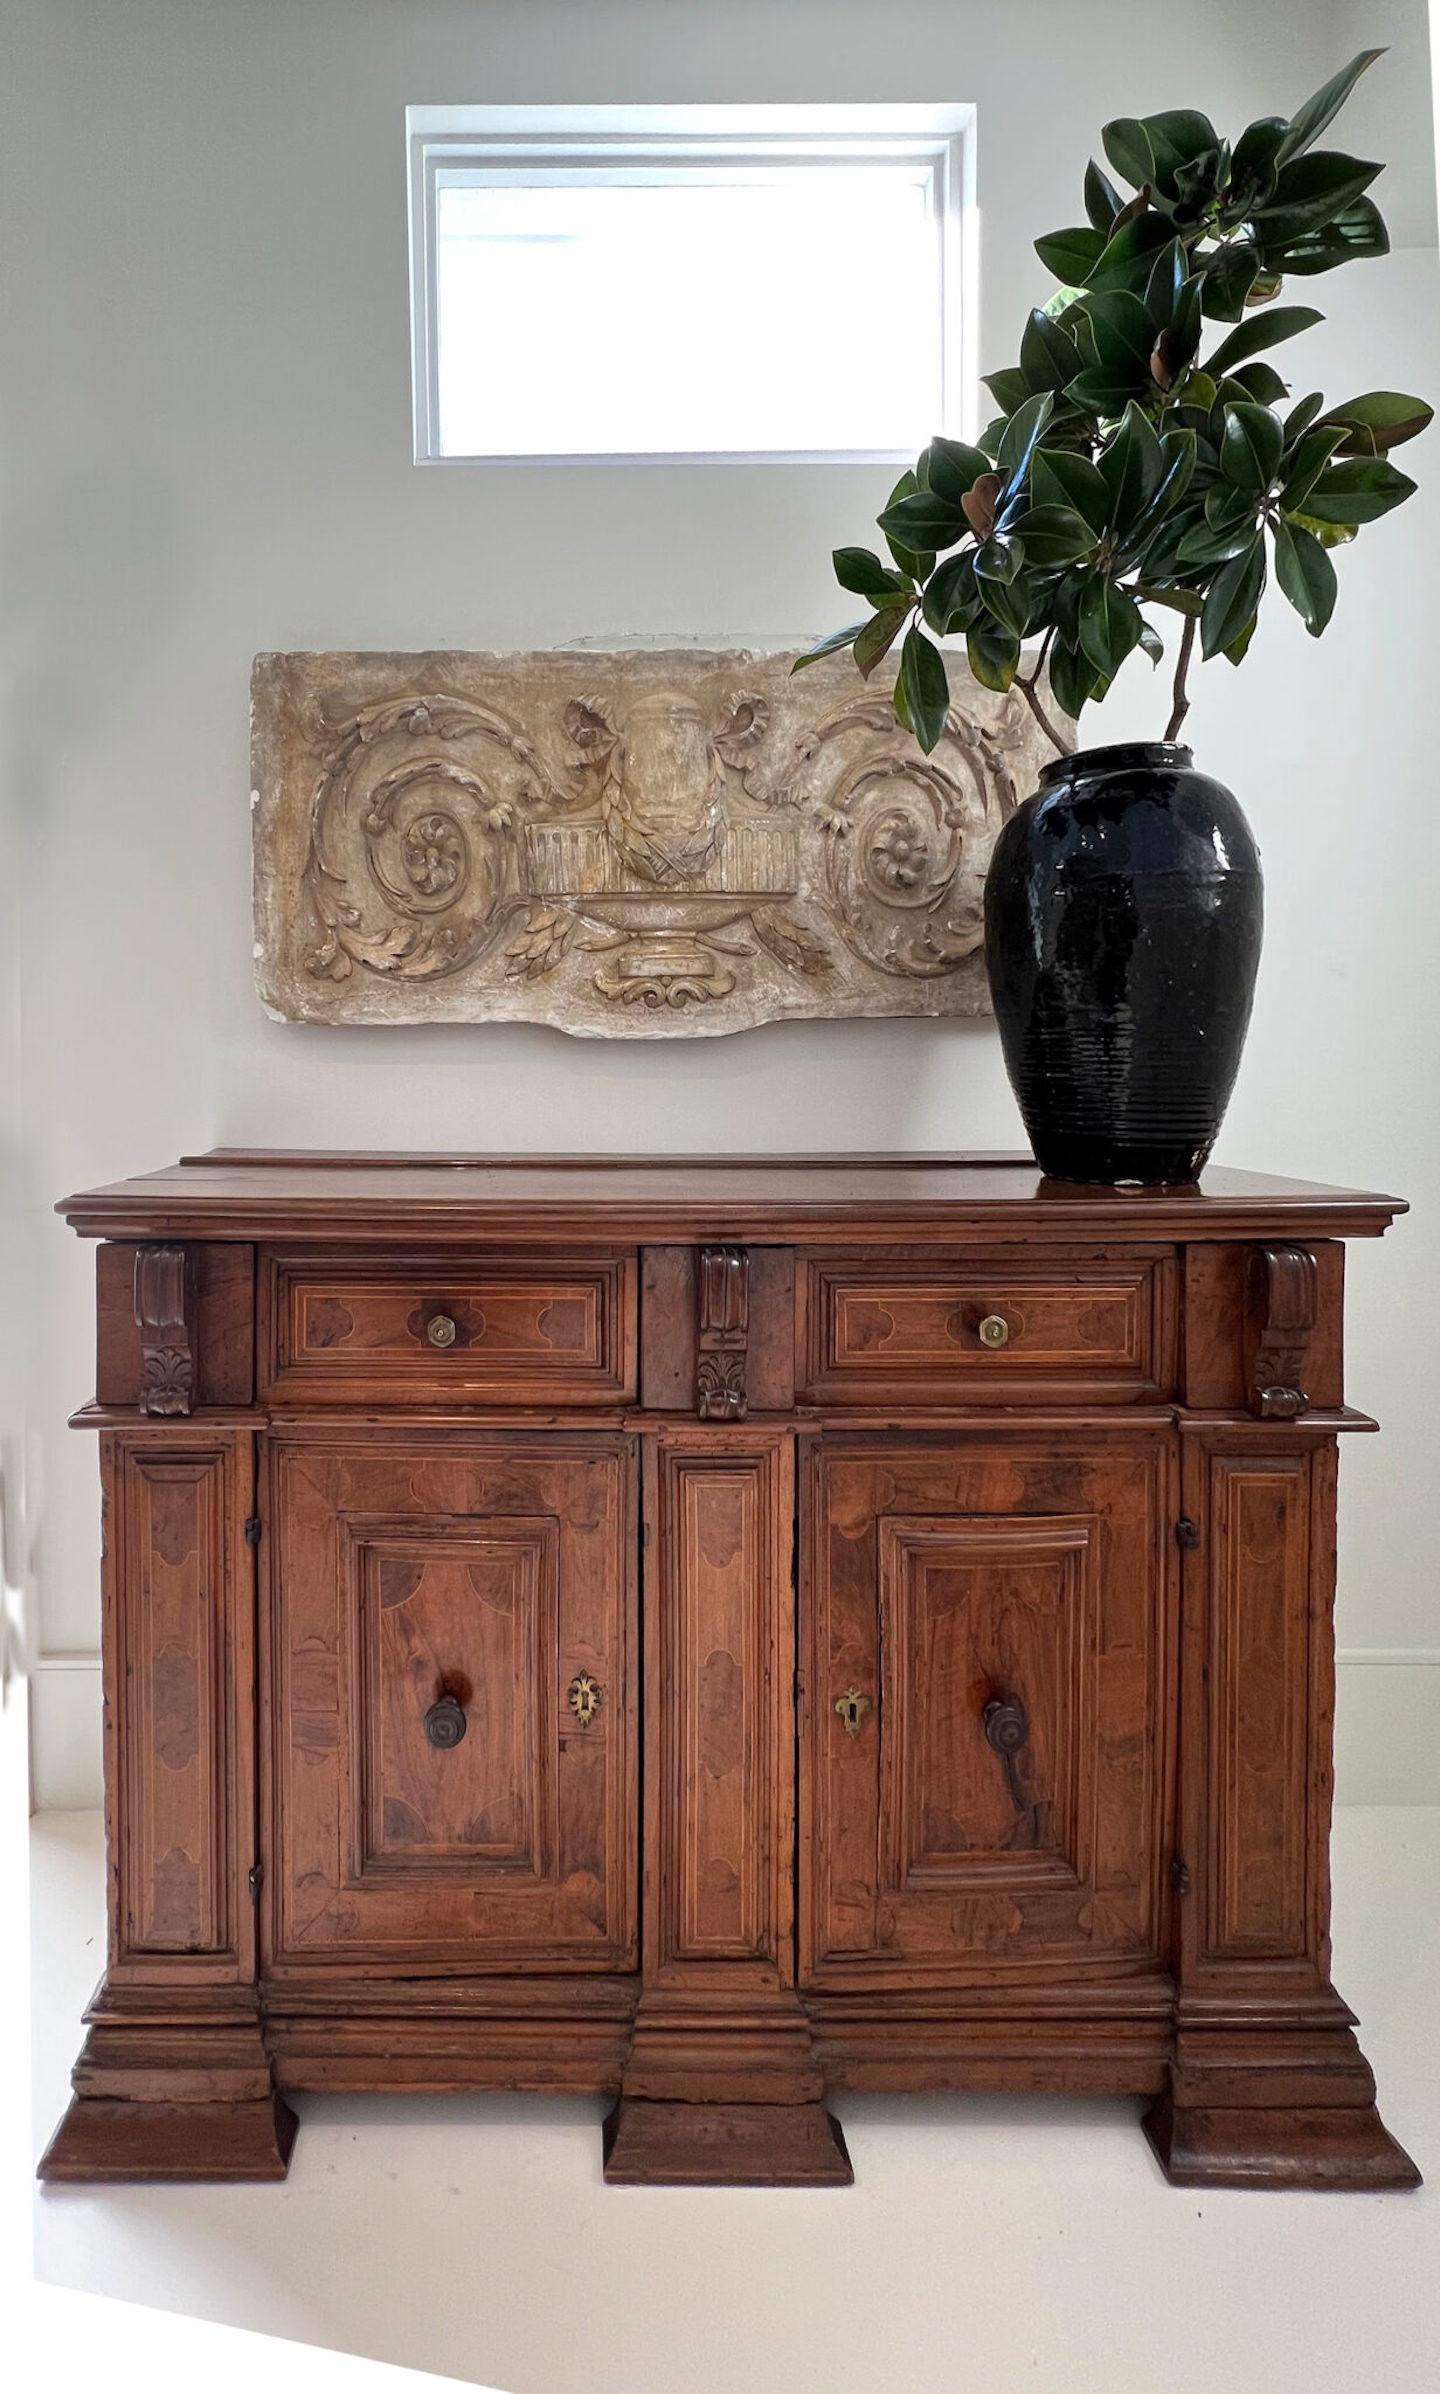 17c Italian Baroque buffet or credenza with two drawers over two doors, five drawer, with 3 hidden drawers over the columns. Made of inlaid walnut, with bronze and wood pulls.
 